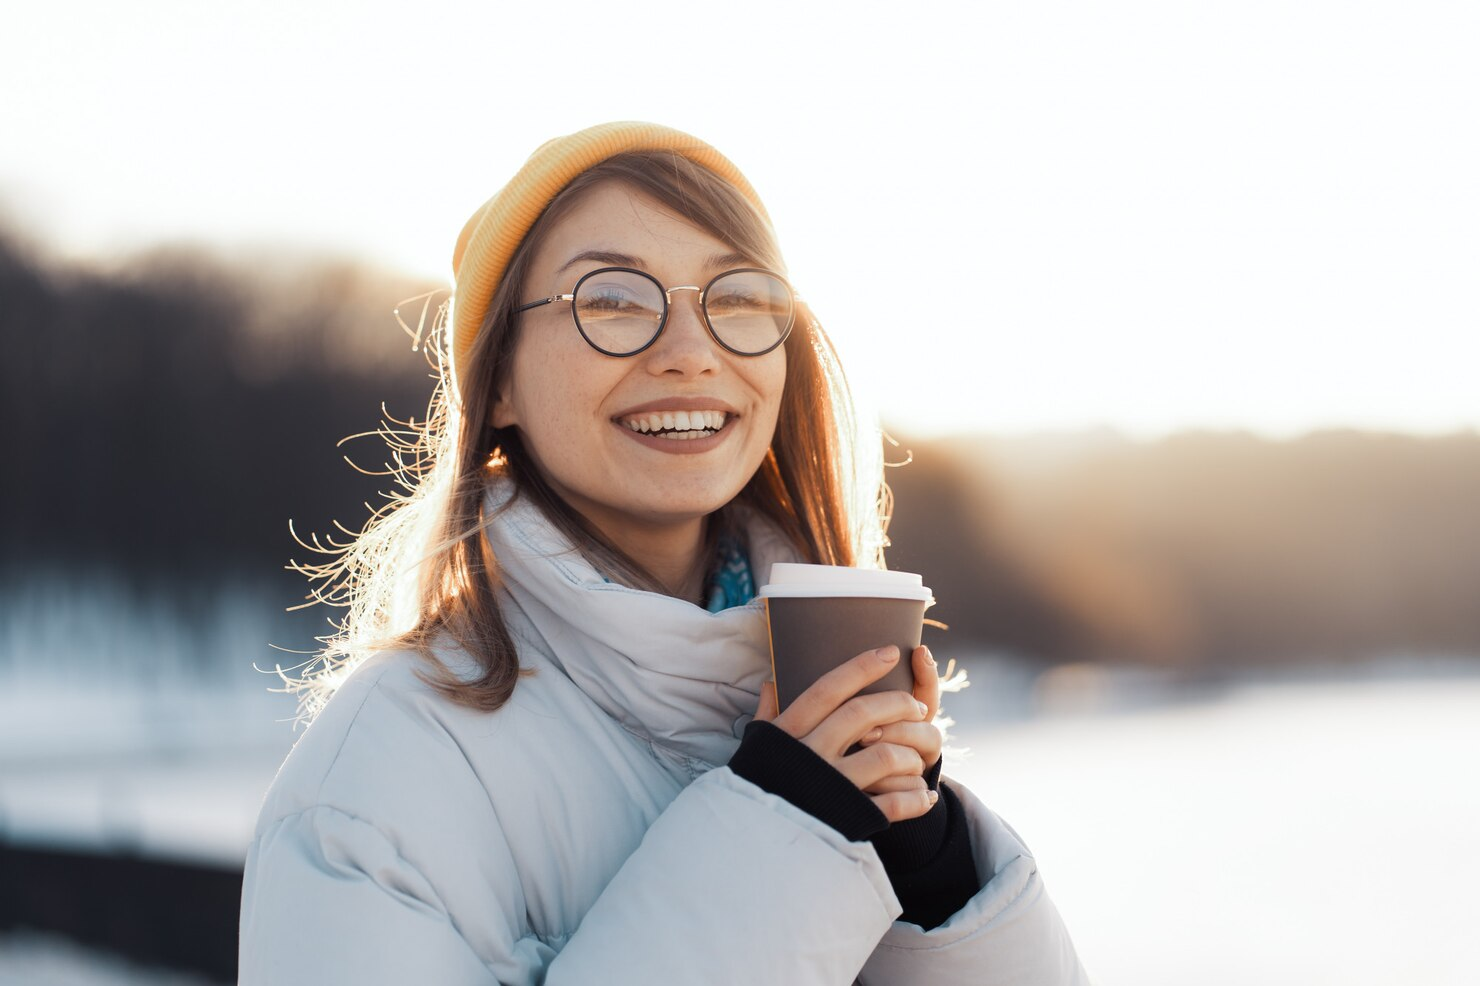 A woman laughing and holding a coffee cup in winter.